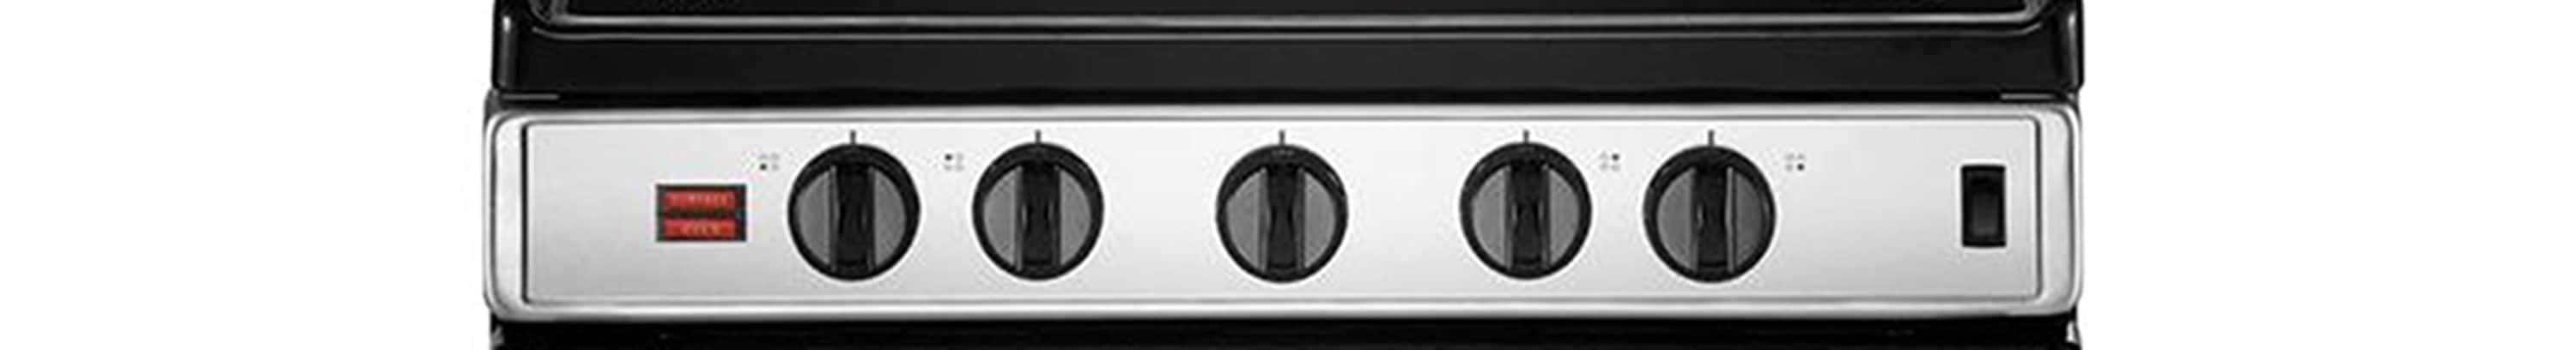 Whirlpool® 24 Stainless Steel Free Standing Electric Range Home